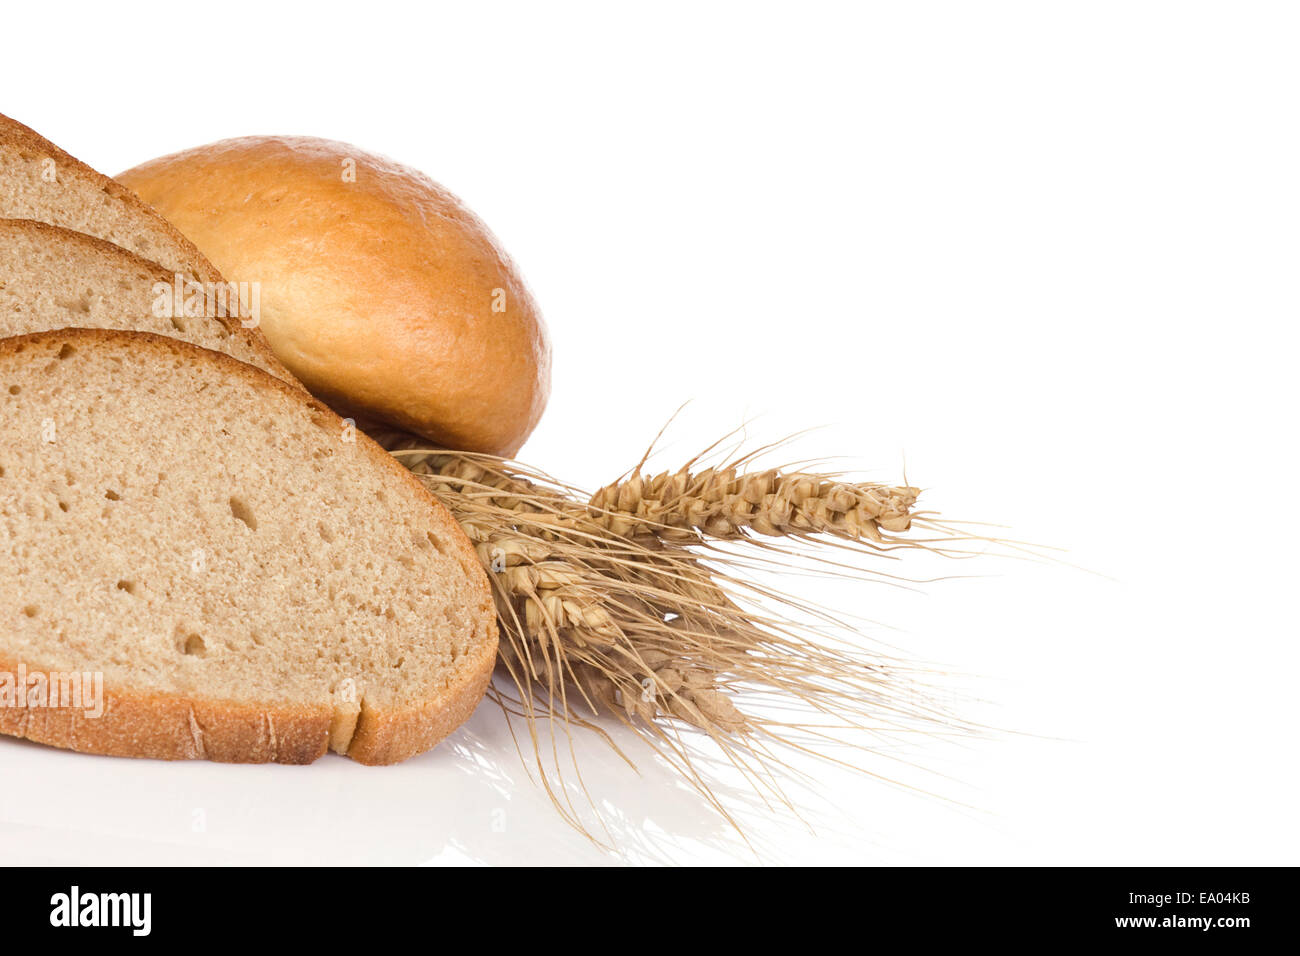 isolated bun and bread with wheat Stock Photo